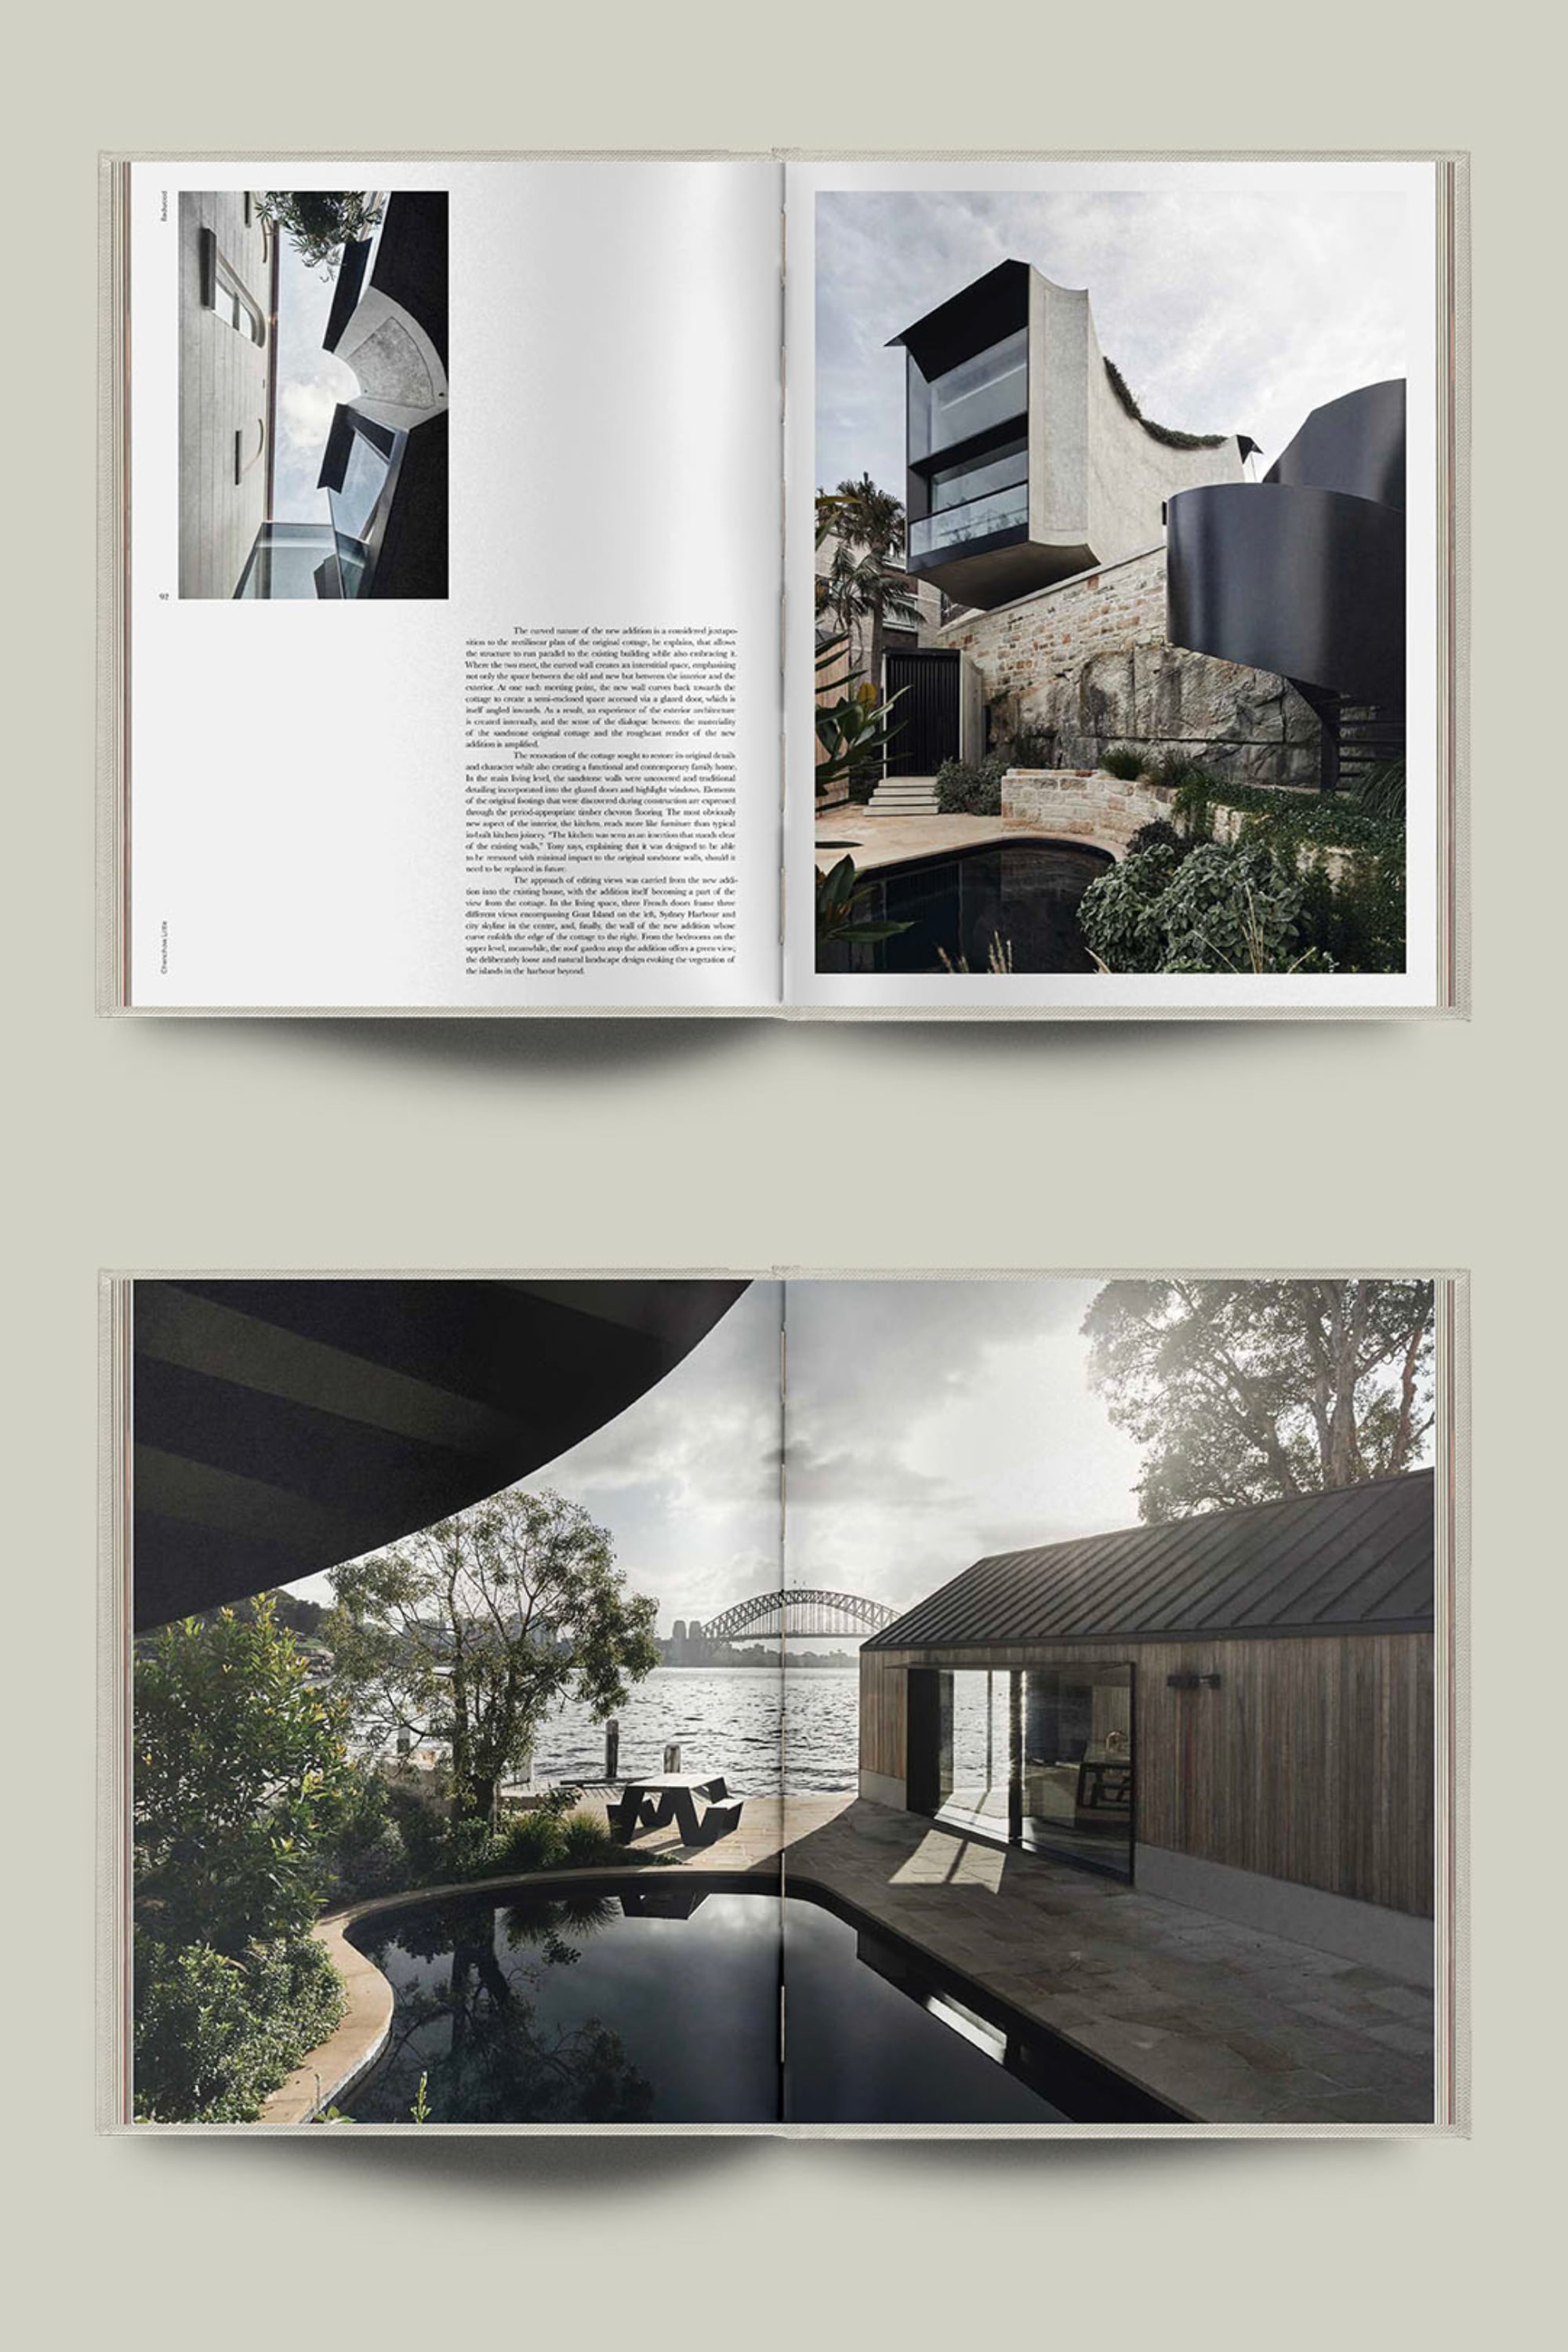 Highlighting Australasian architecture and design